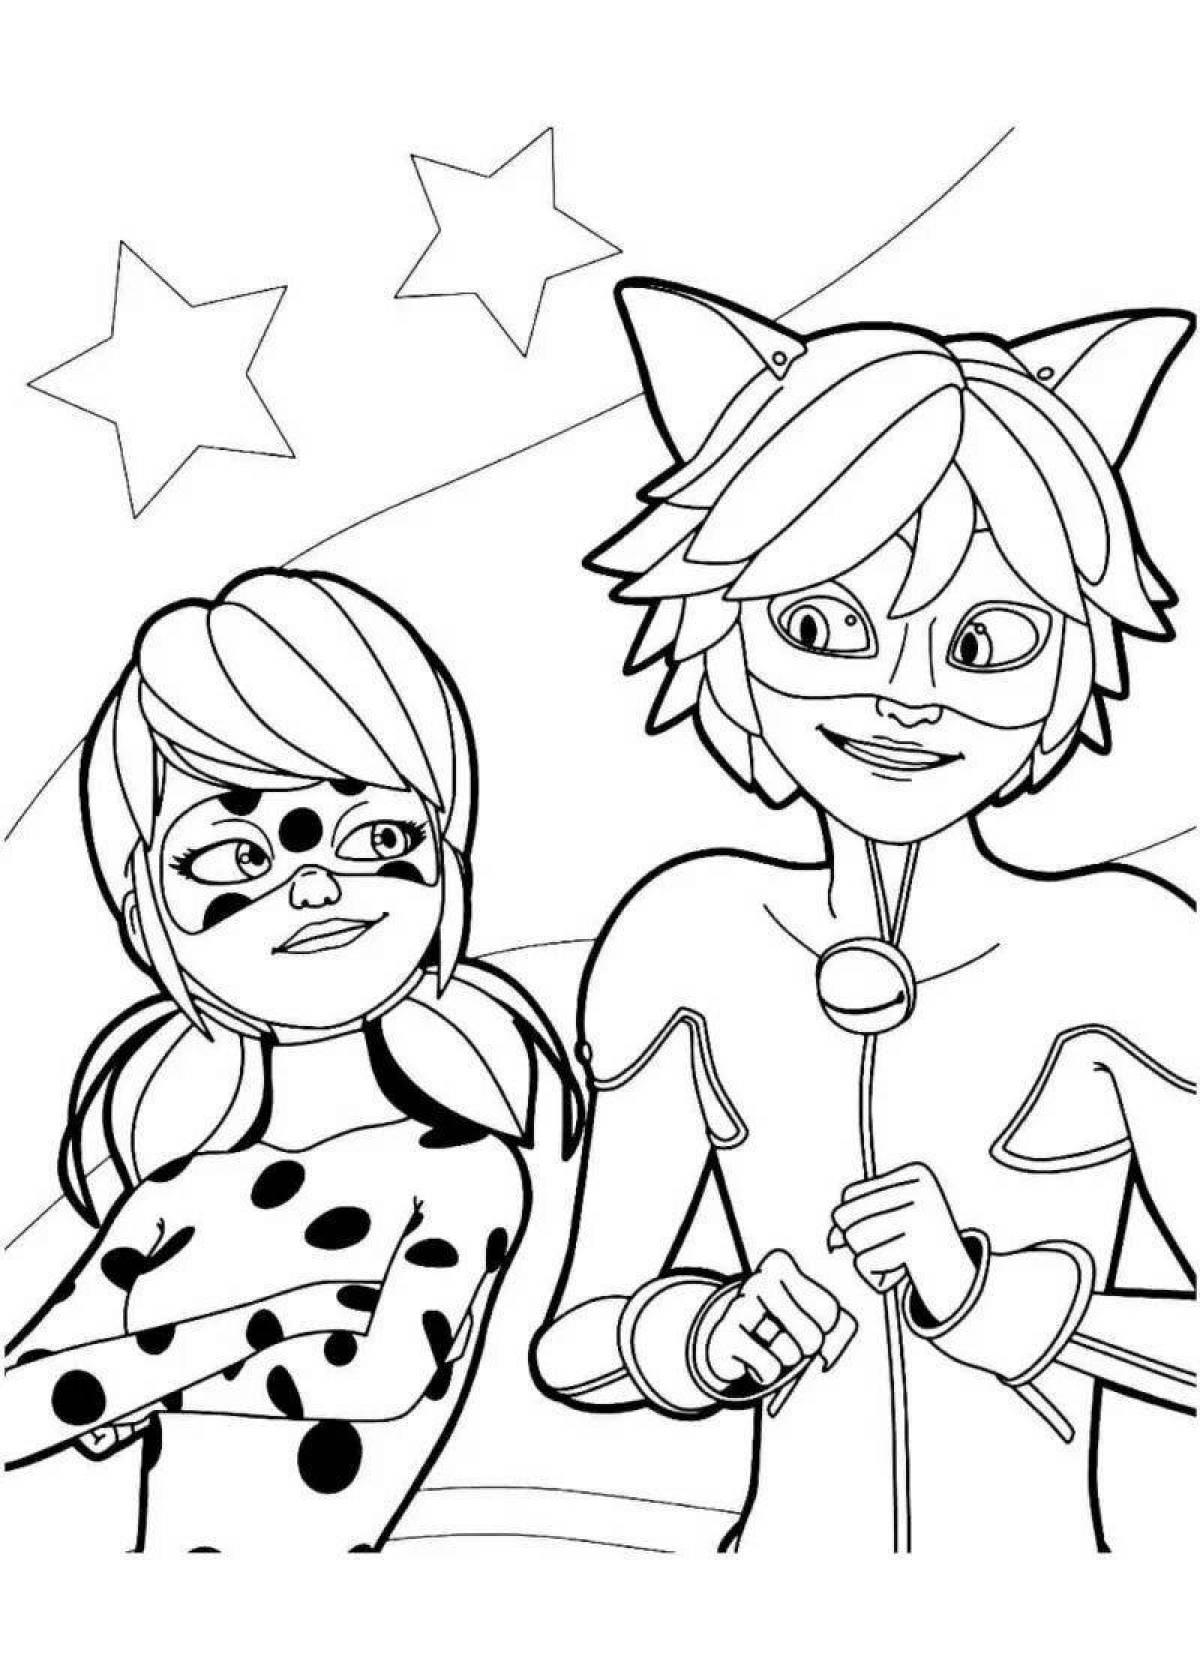 Colorful ladybug and super cat coloring book